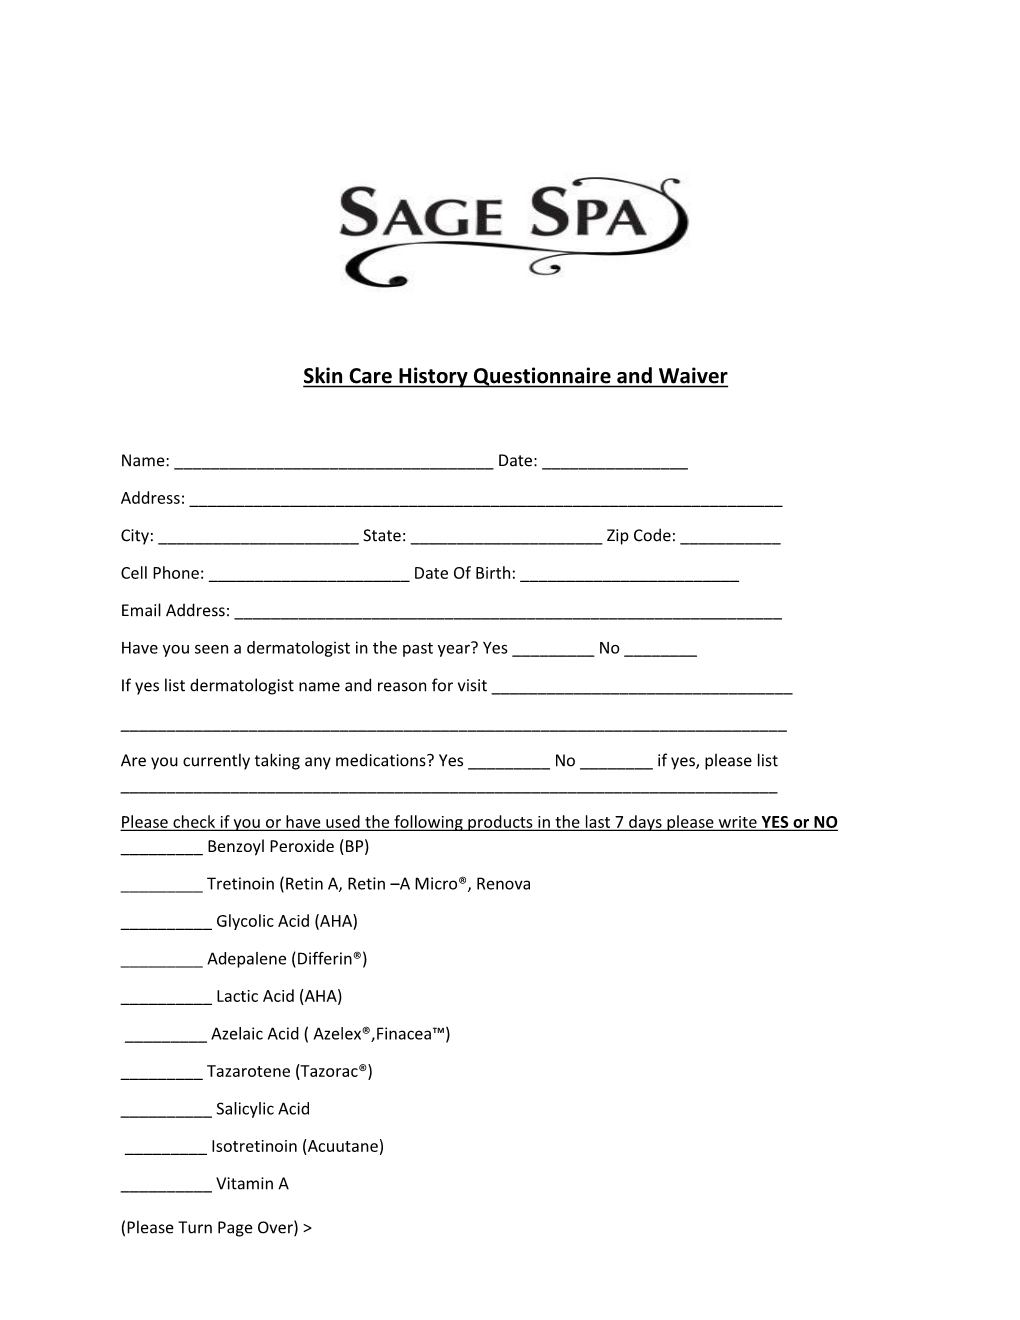 Skin Care History Questionnaire and Waiver